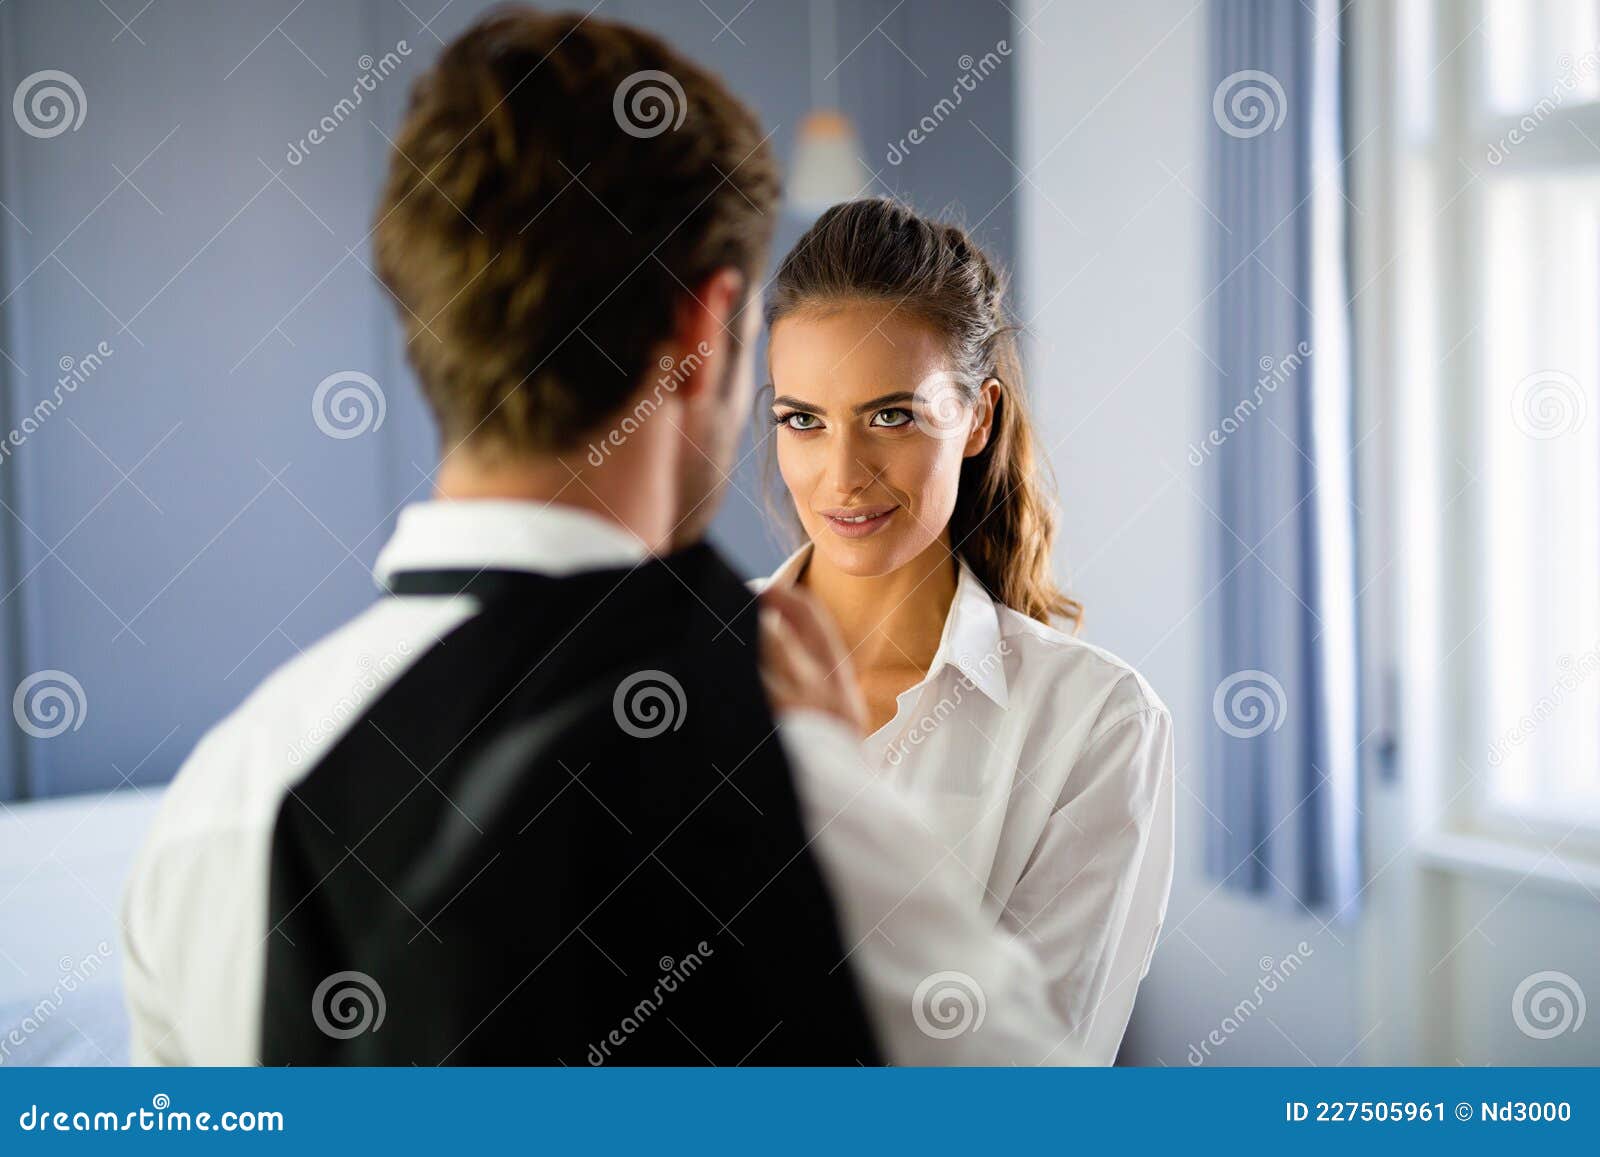 Loving Couple Having Intimate Moments In Bedroom Stock Image Image Of Sexuality Beautiful